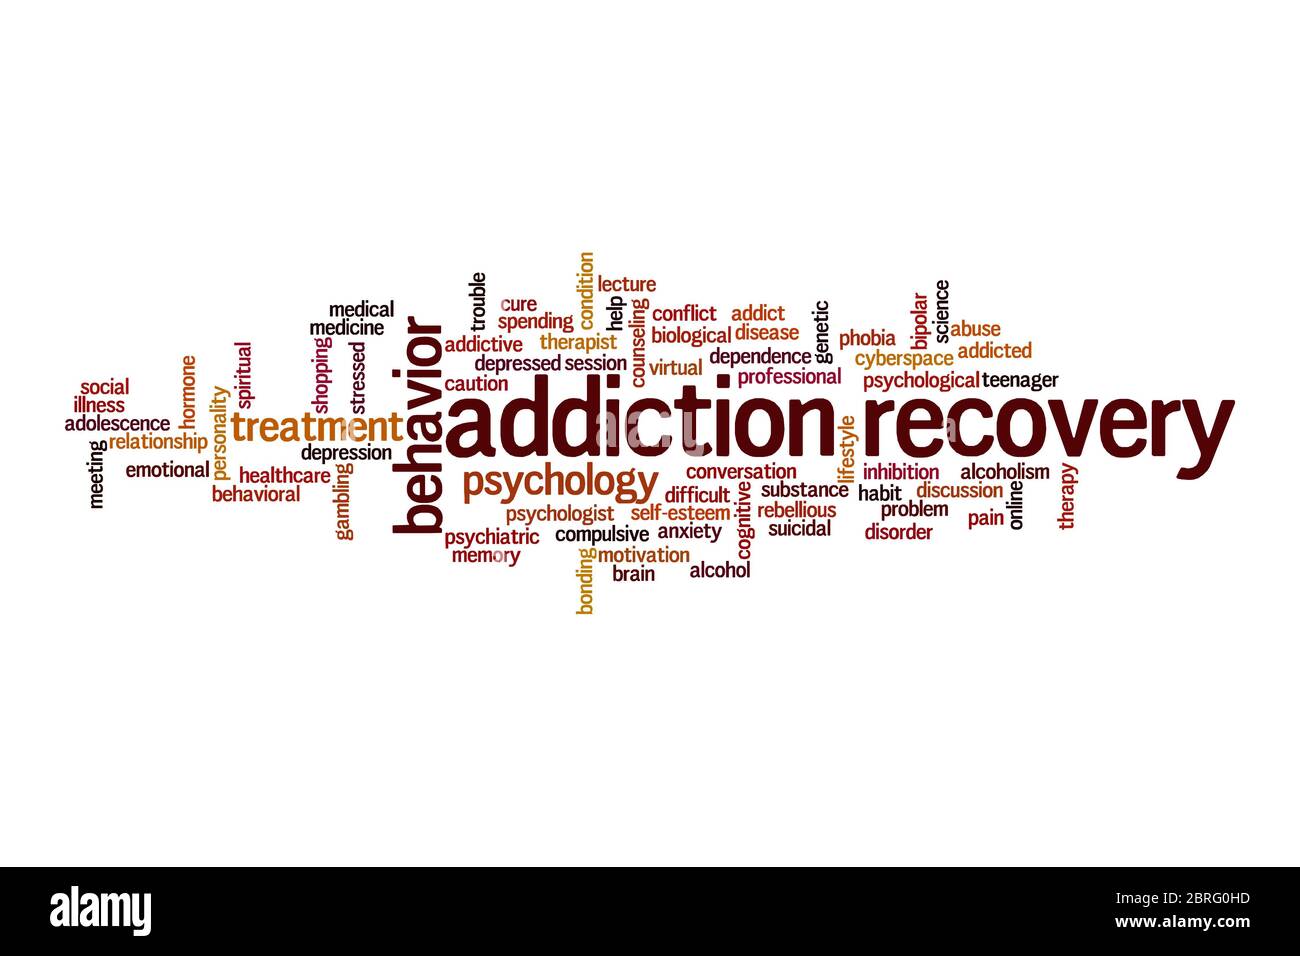 Addiction recovery cloud concept on white background Stock Photo